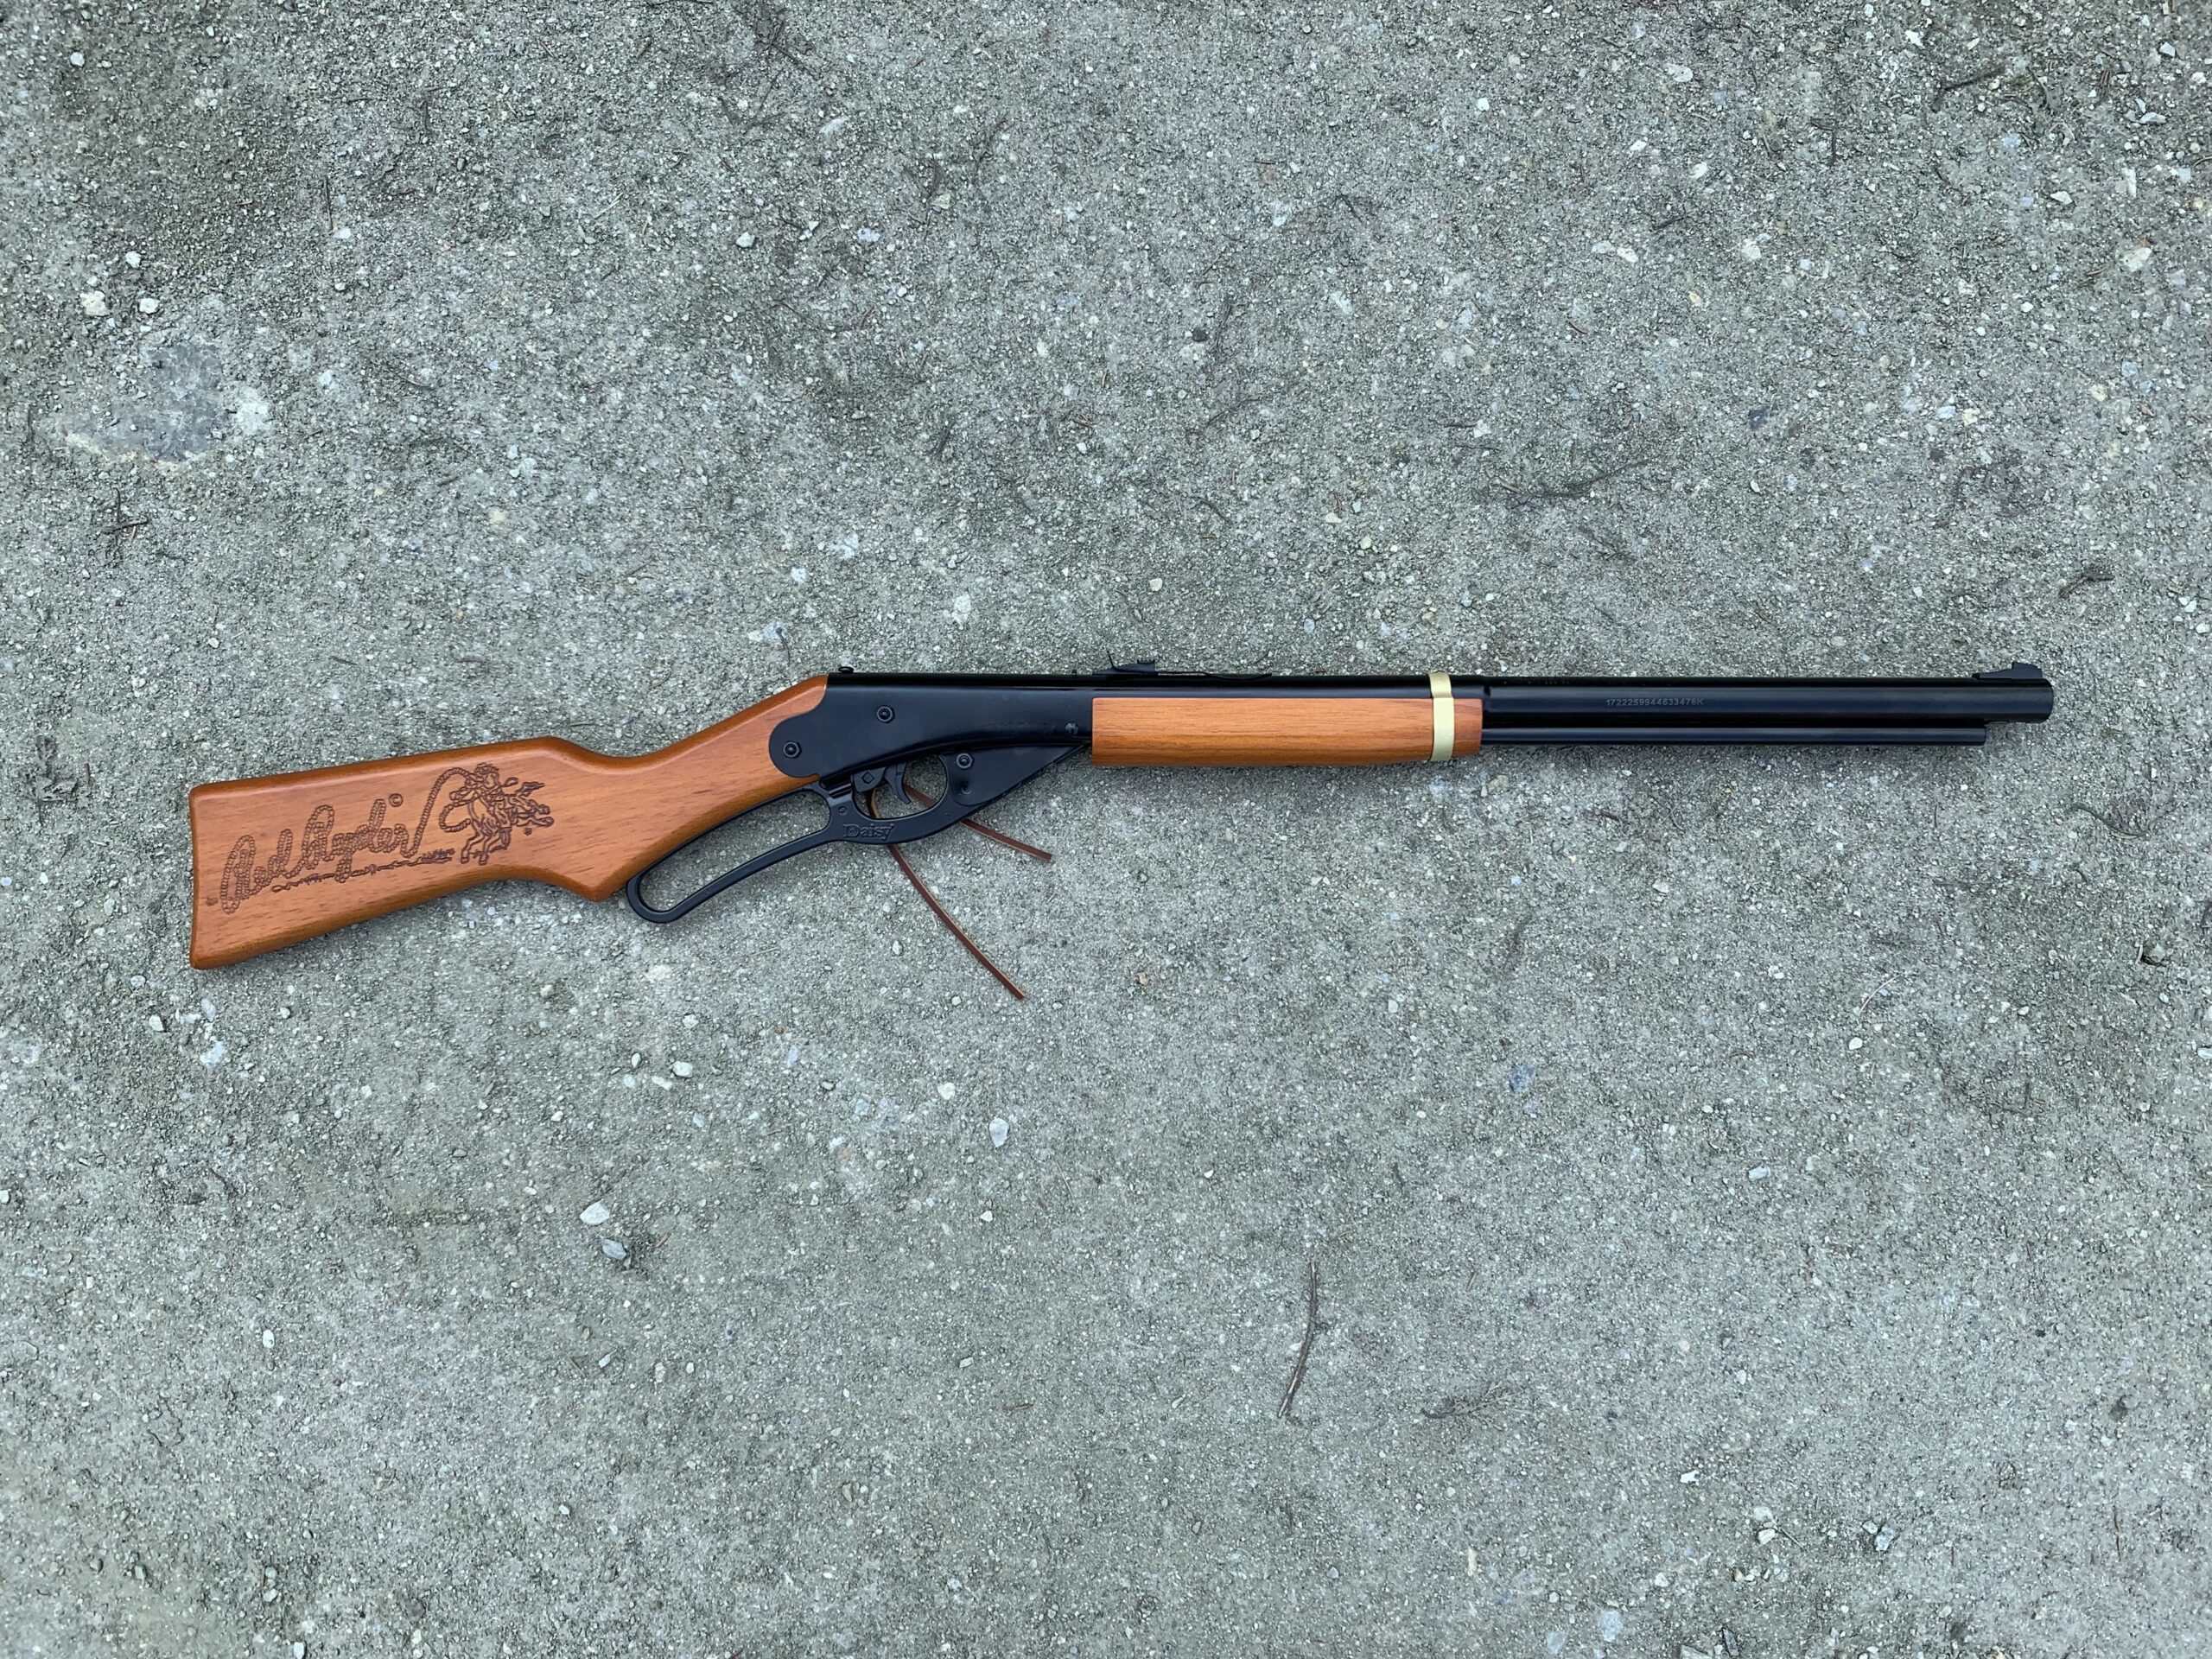 The Daisy Red Ryder is the best bb gun for kids